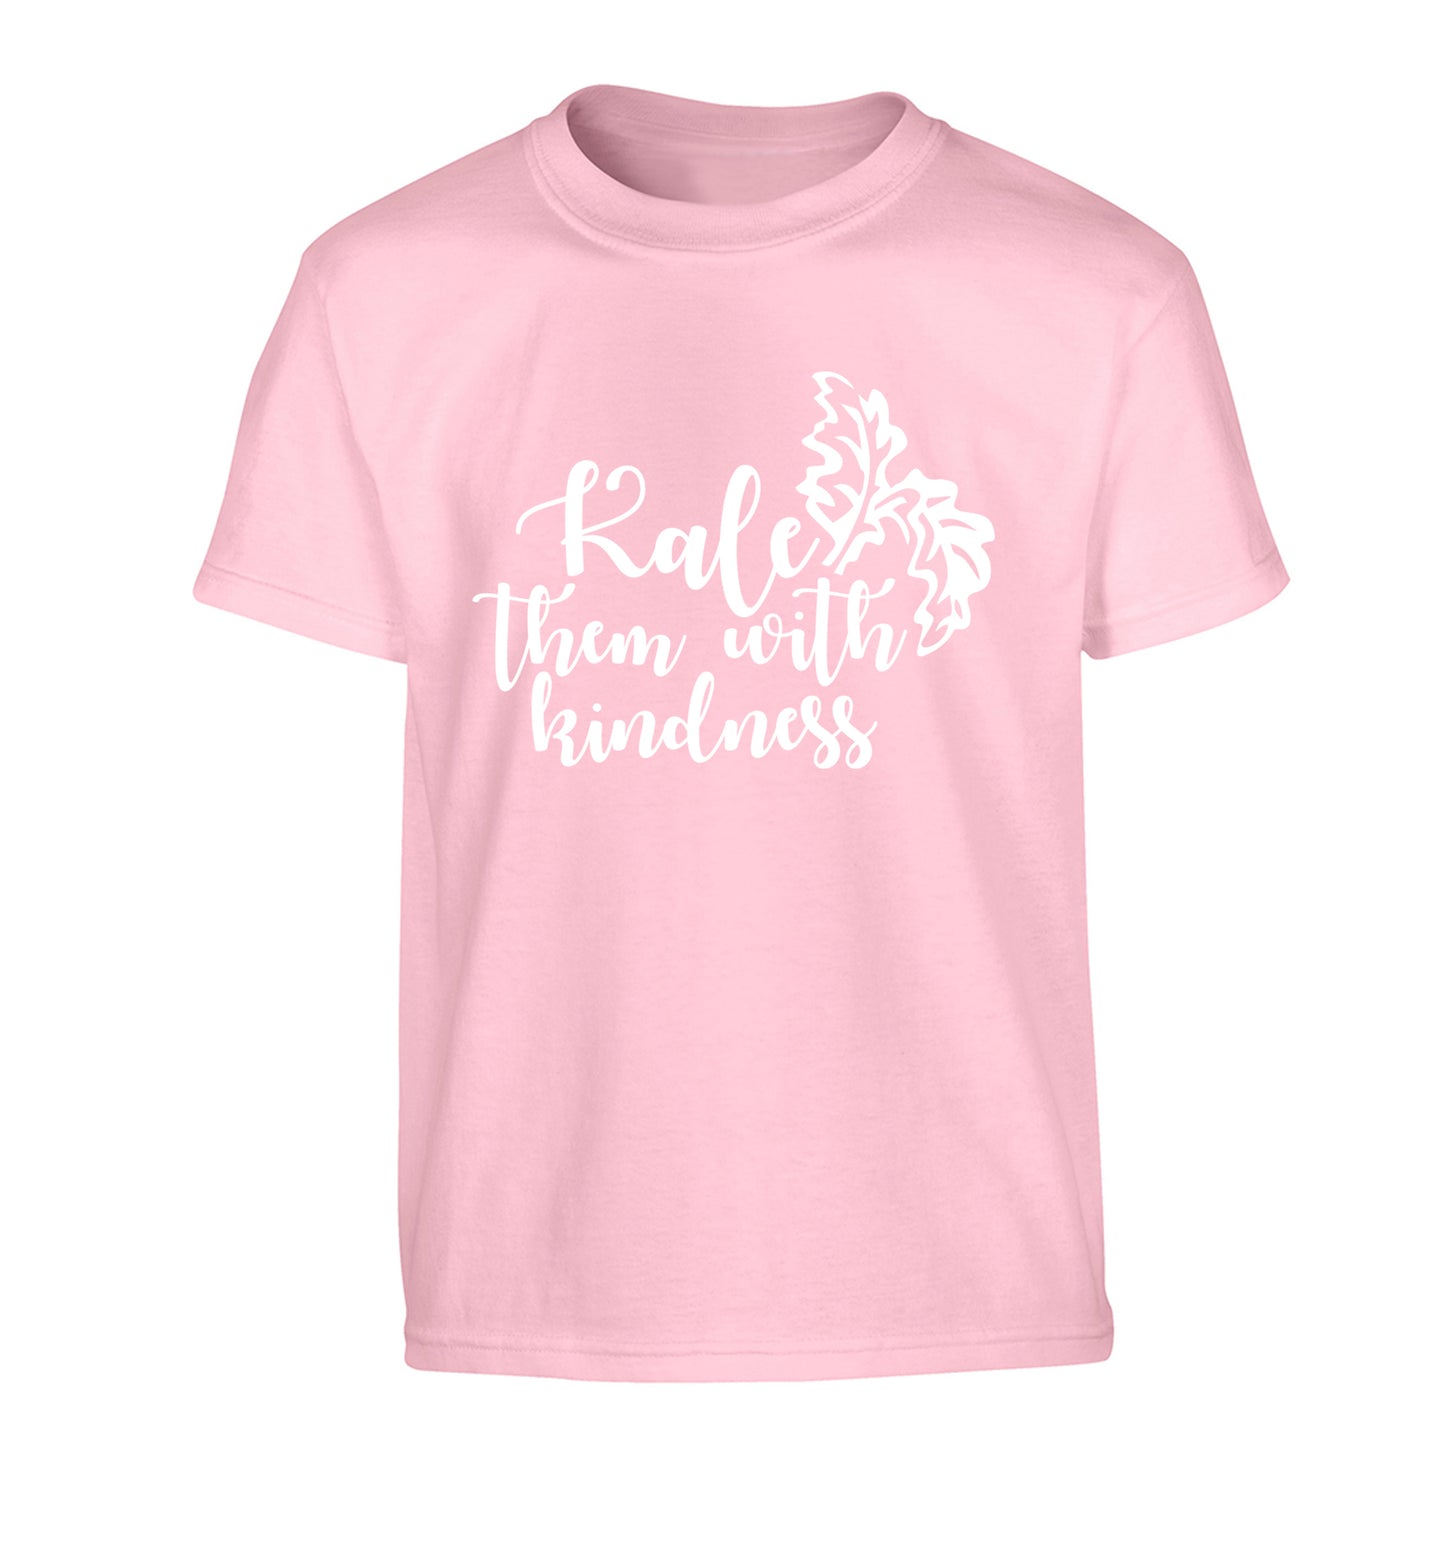 Kale them with kindness Children's light pink Tshirt 12-14 Years